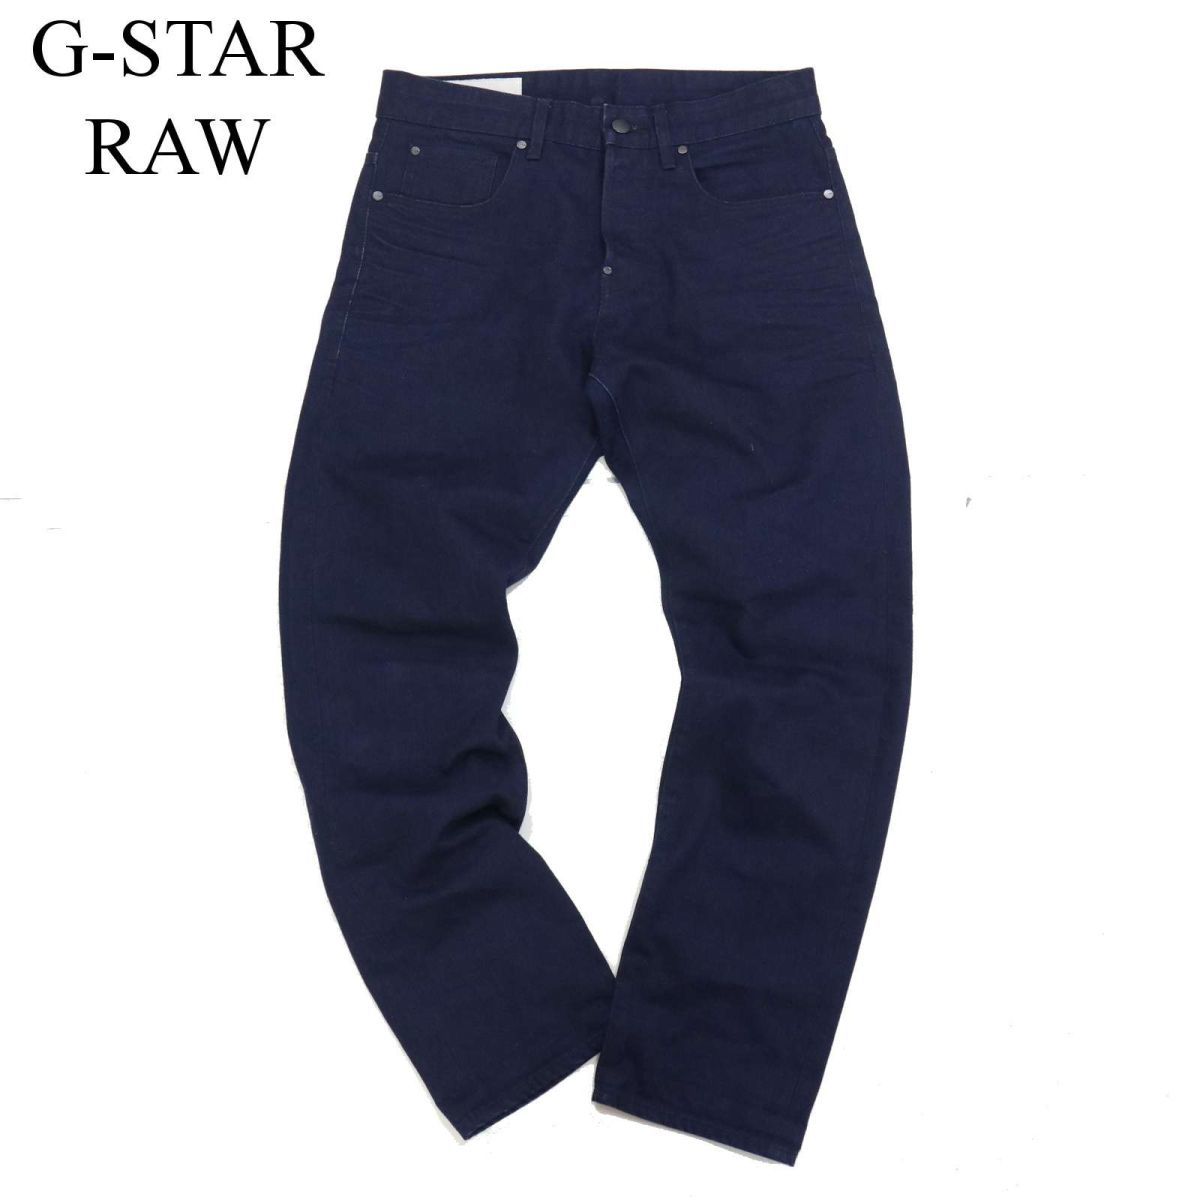 G-STAR RAW ジースター ロウ 【GSRR US FIRST CLASSIC TAPERED】赤耳